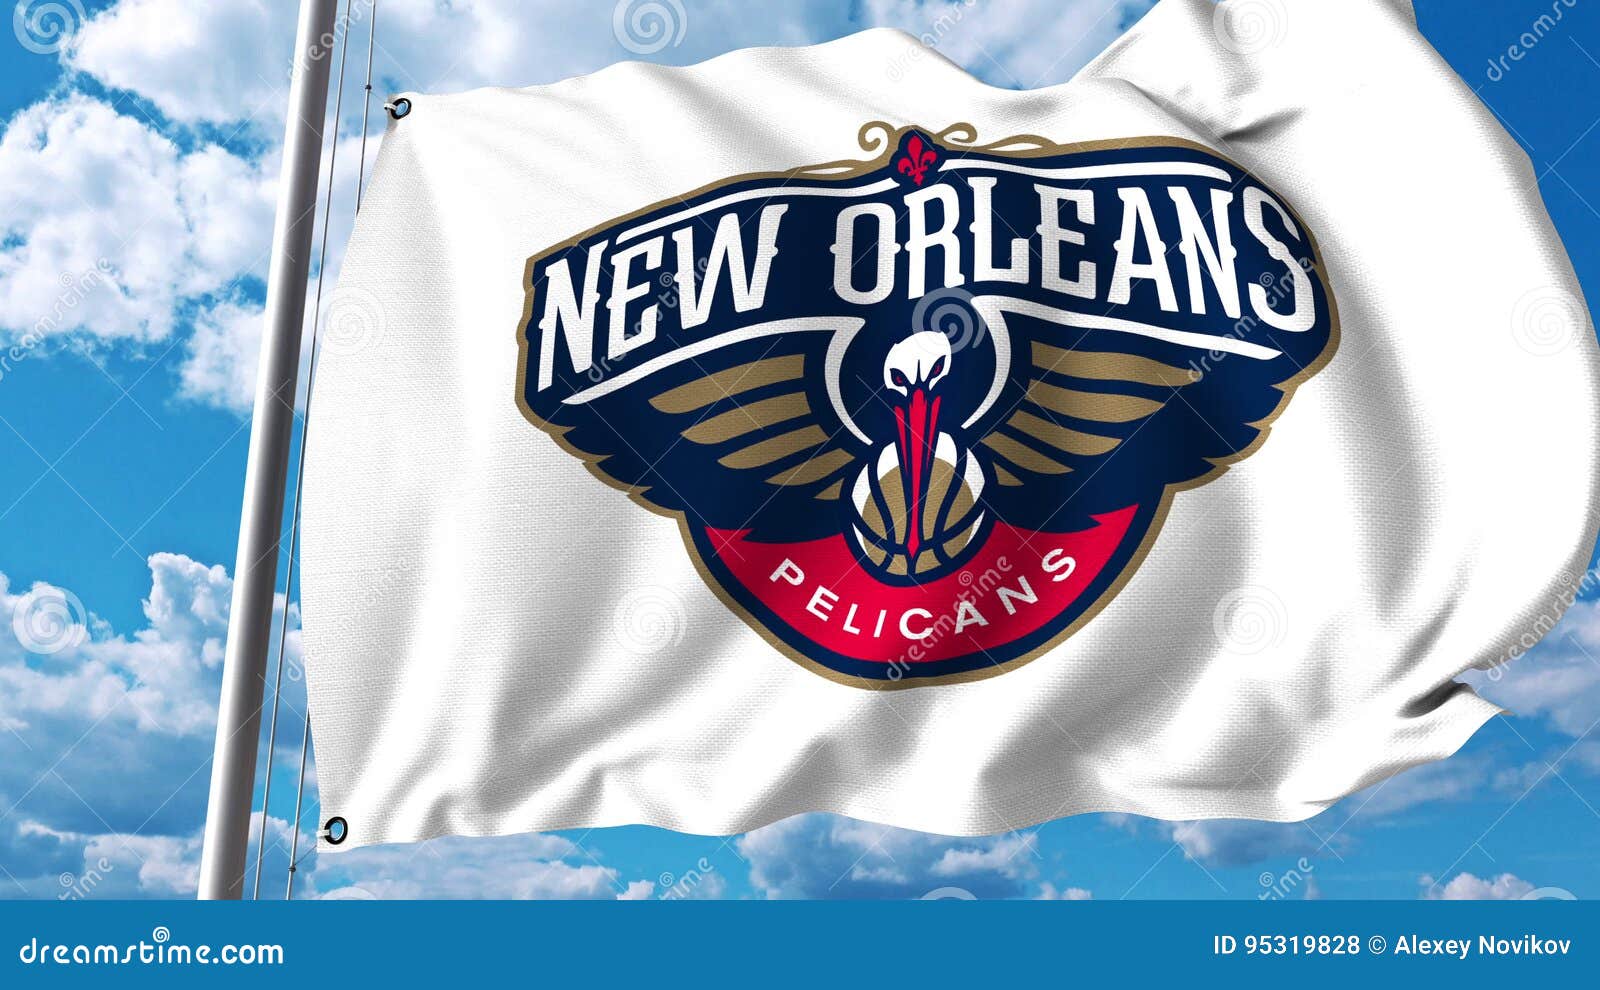 New Orleans Pelicans Logo Wallpaper  Background Wallpapers